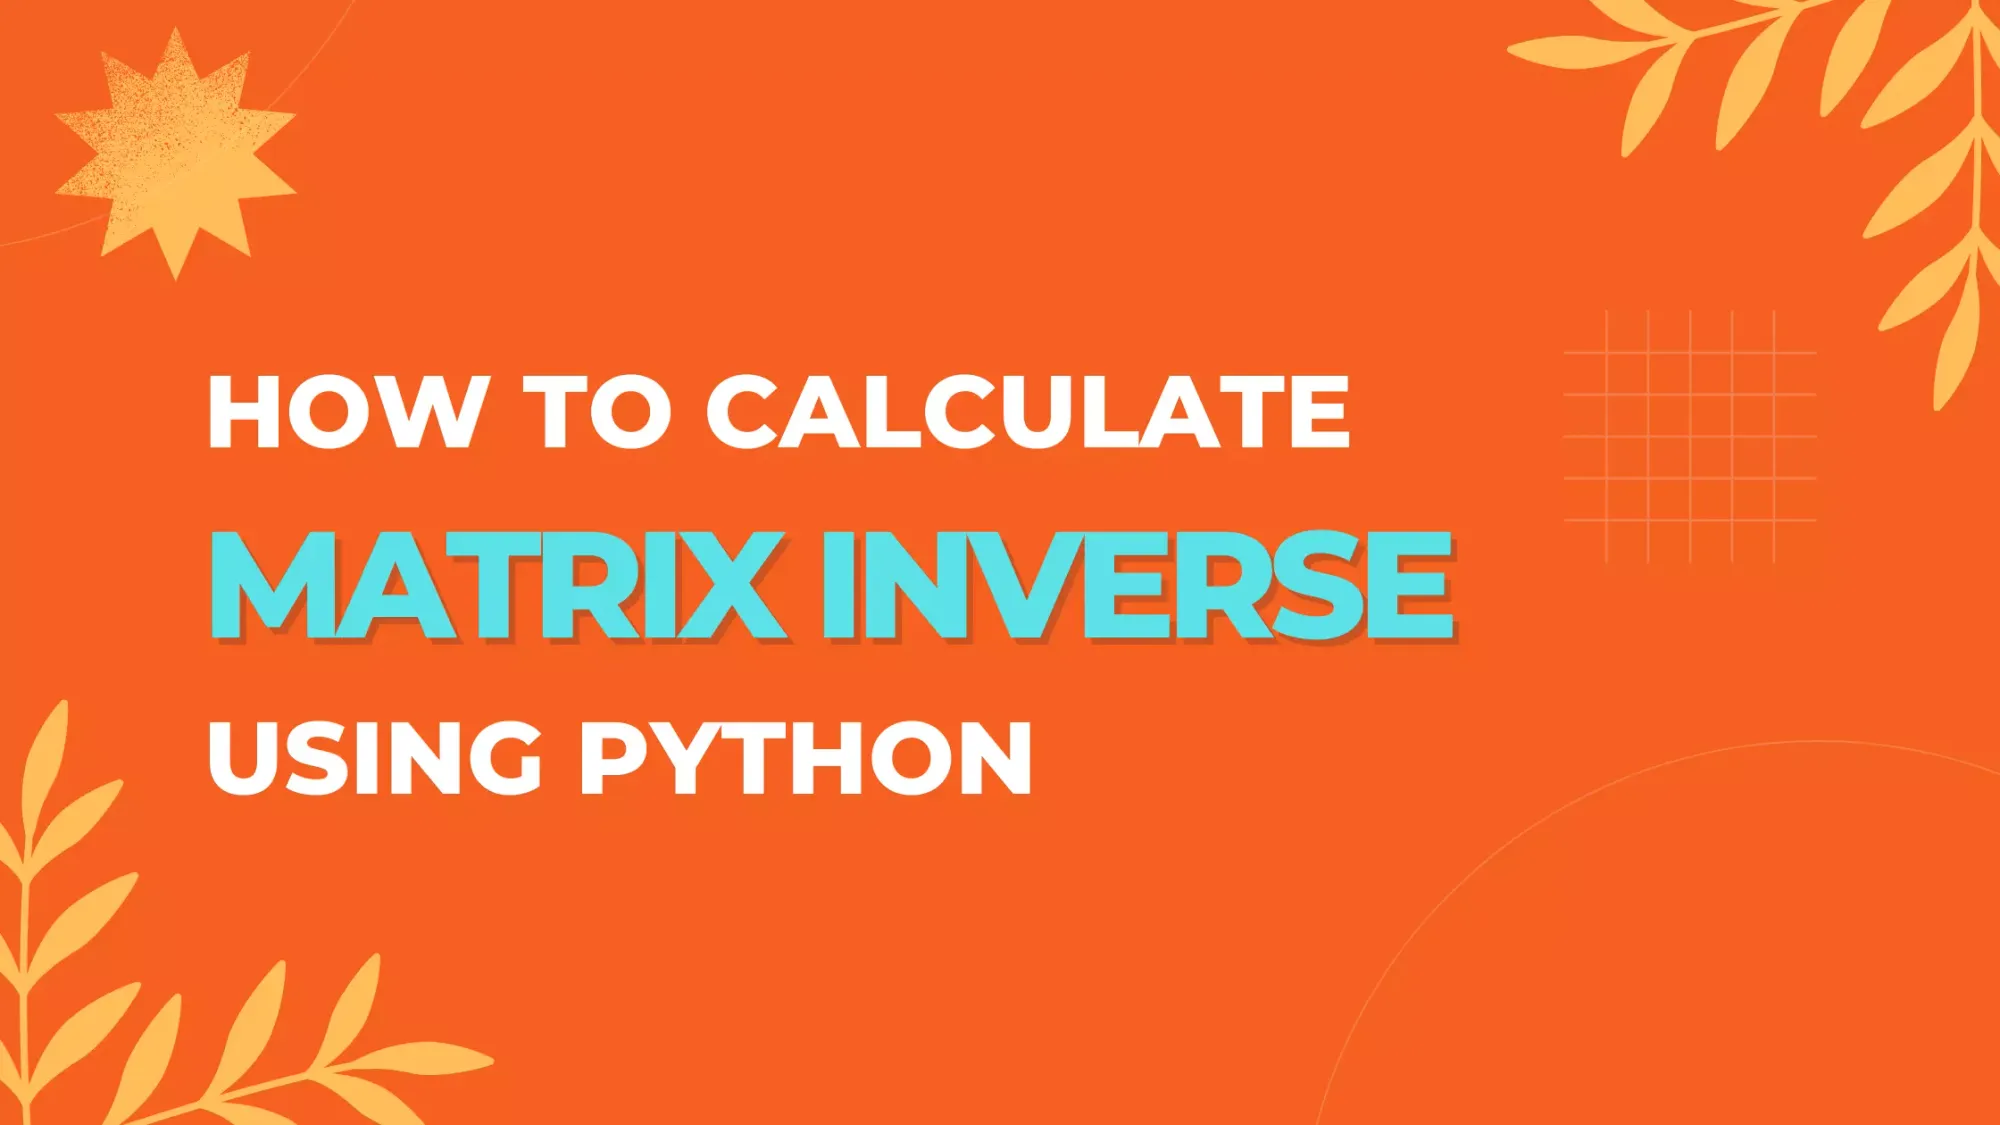 How to Calculate Matrix Inverse in Python